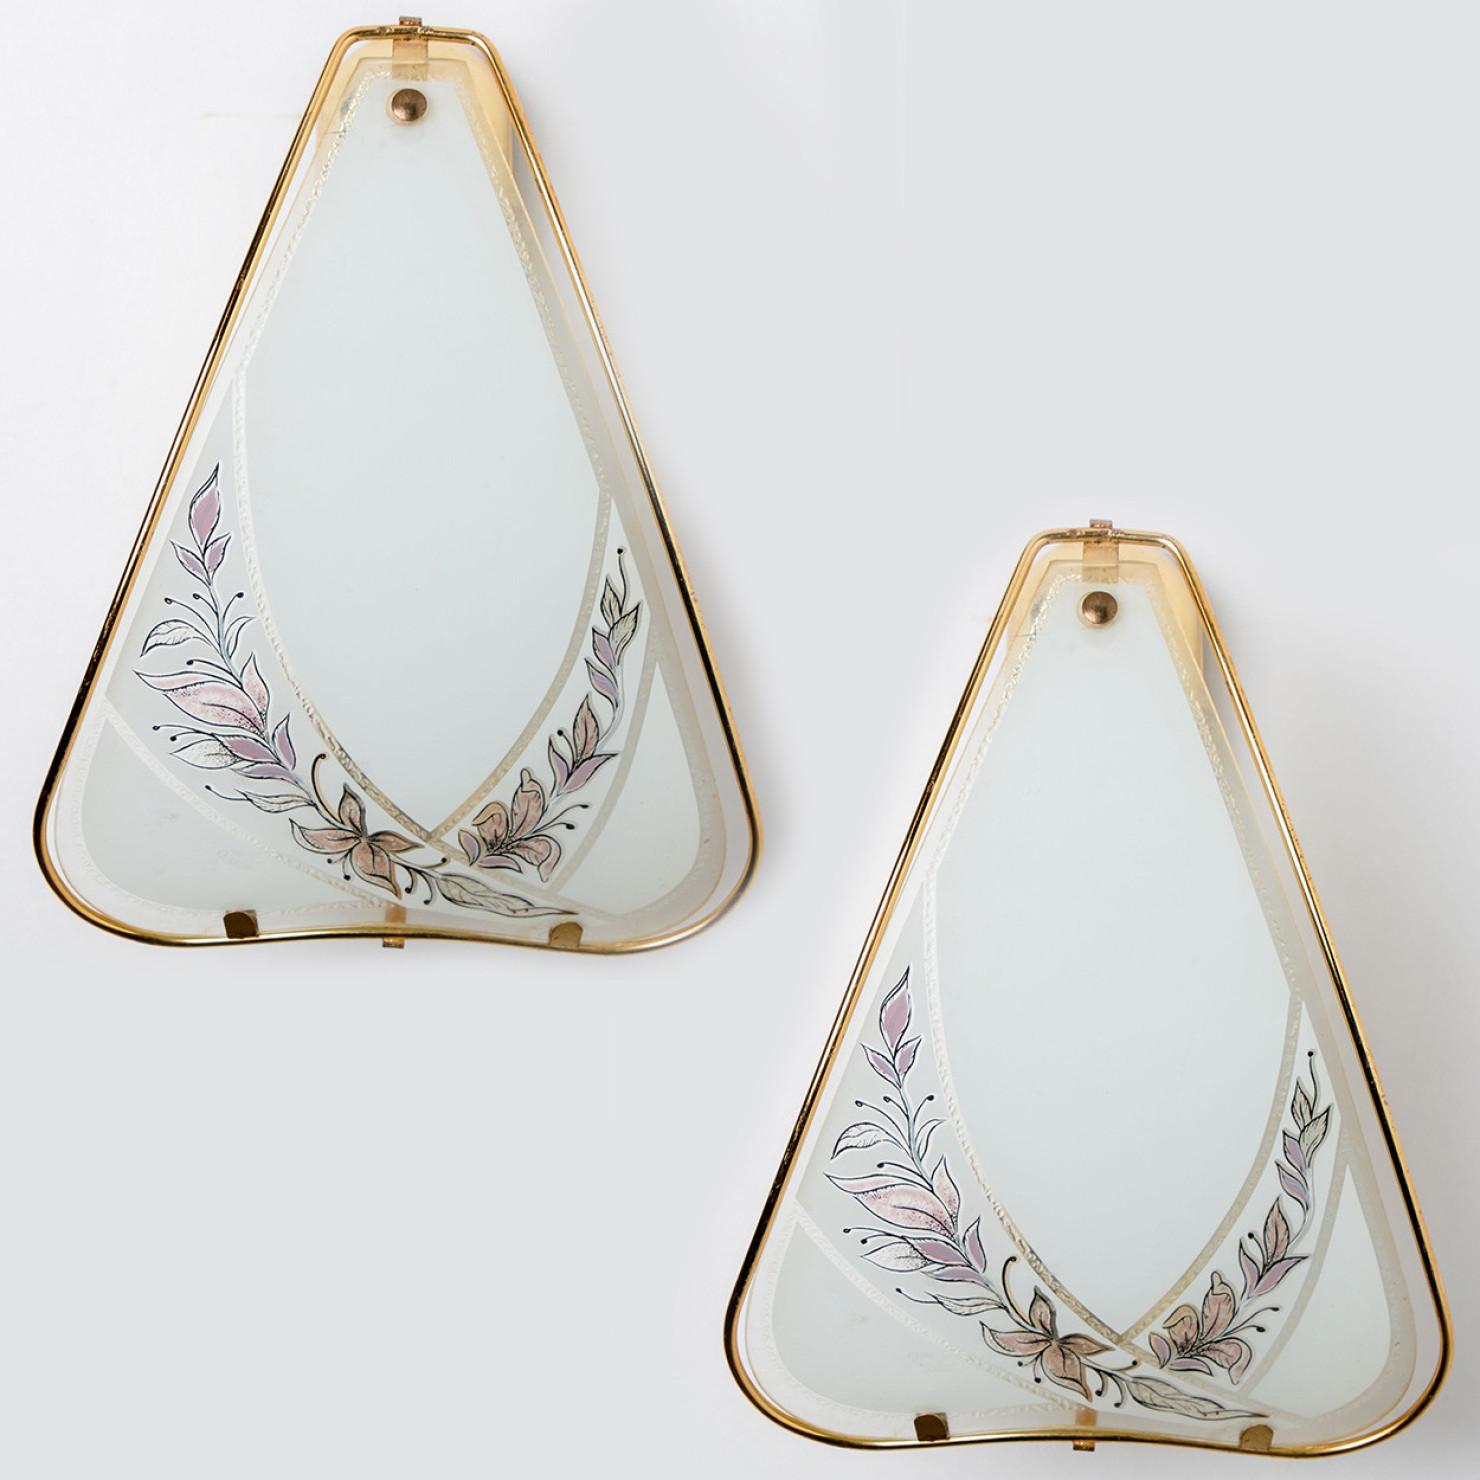 Pair of high-end wall sconces from Sweden. Each wall fixture features a brass base with an opaque white glass element.
The glass is decorated with a pink and purple flower pattern.

Please note the price is for the pair.

Dimensions:
Height: 11.81